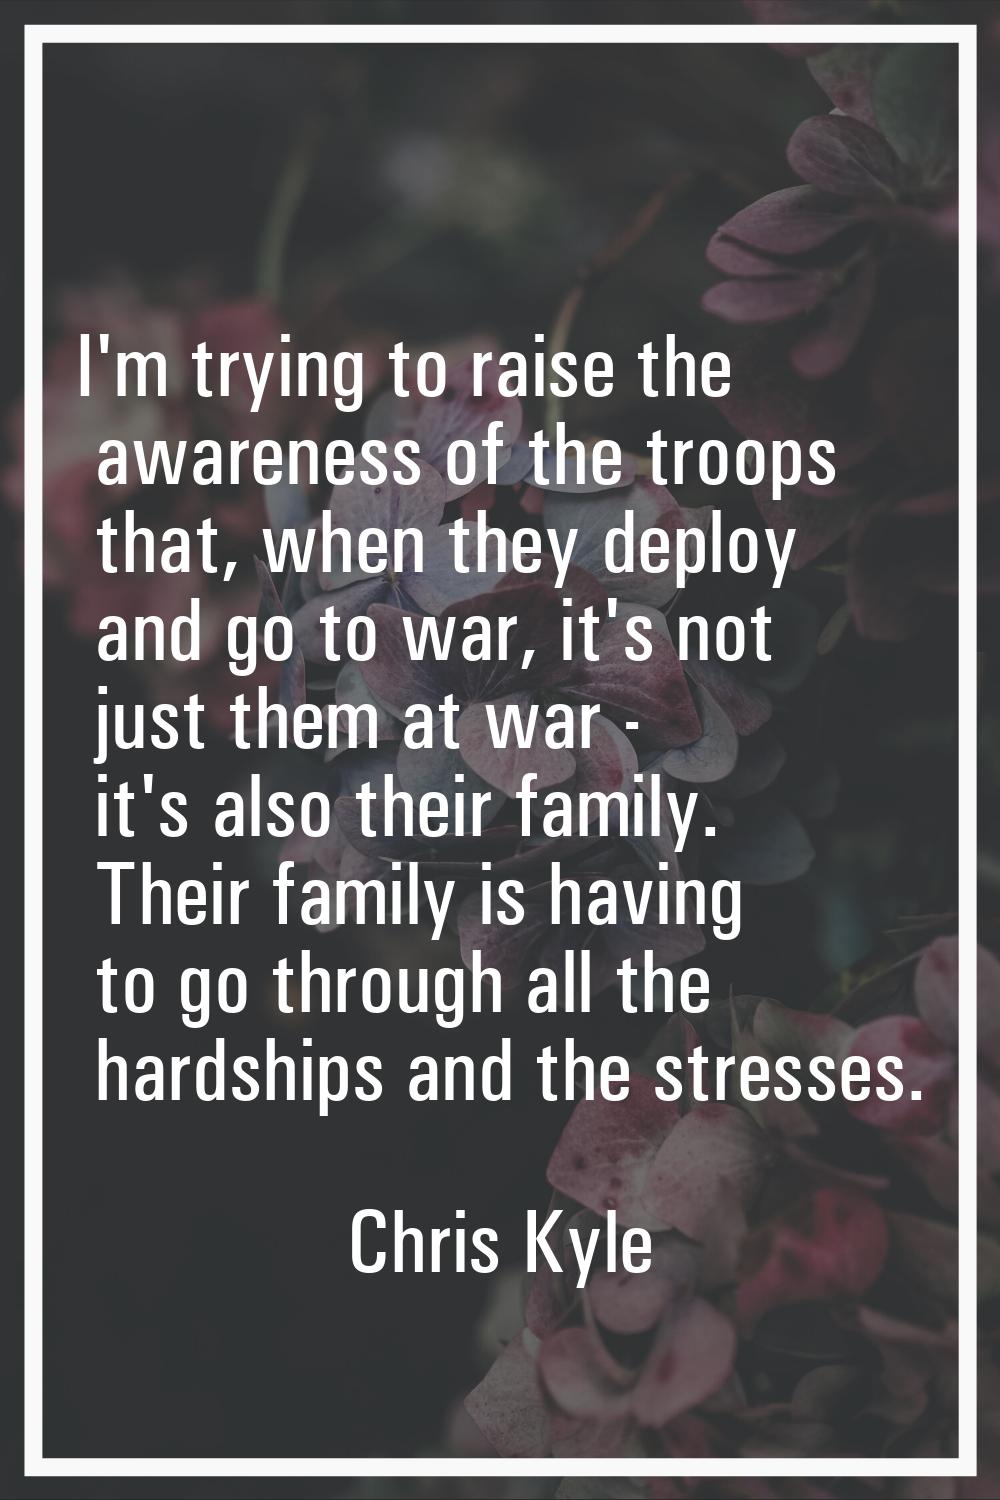 I'm trying to raise the awareness of the troops that, when they deploy and go to war, it's not just